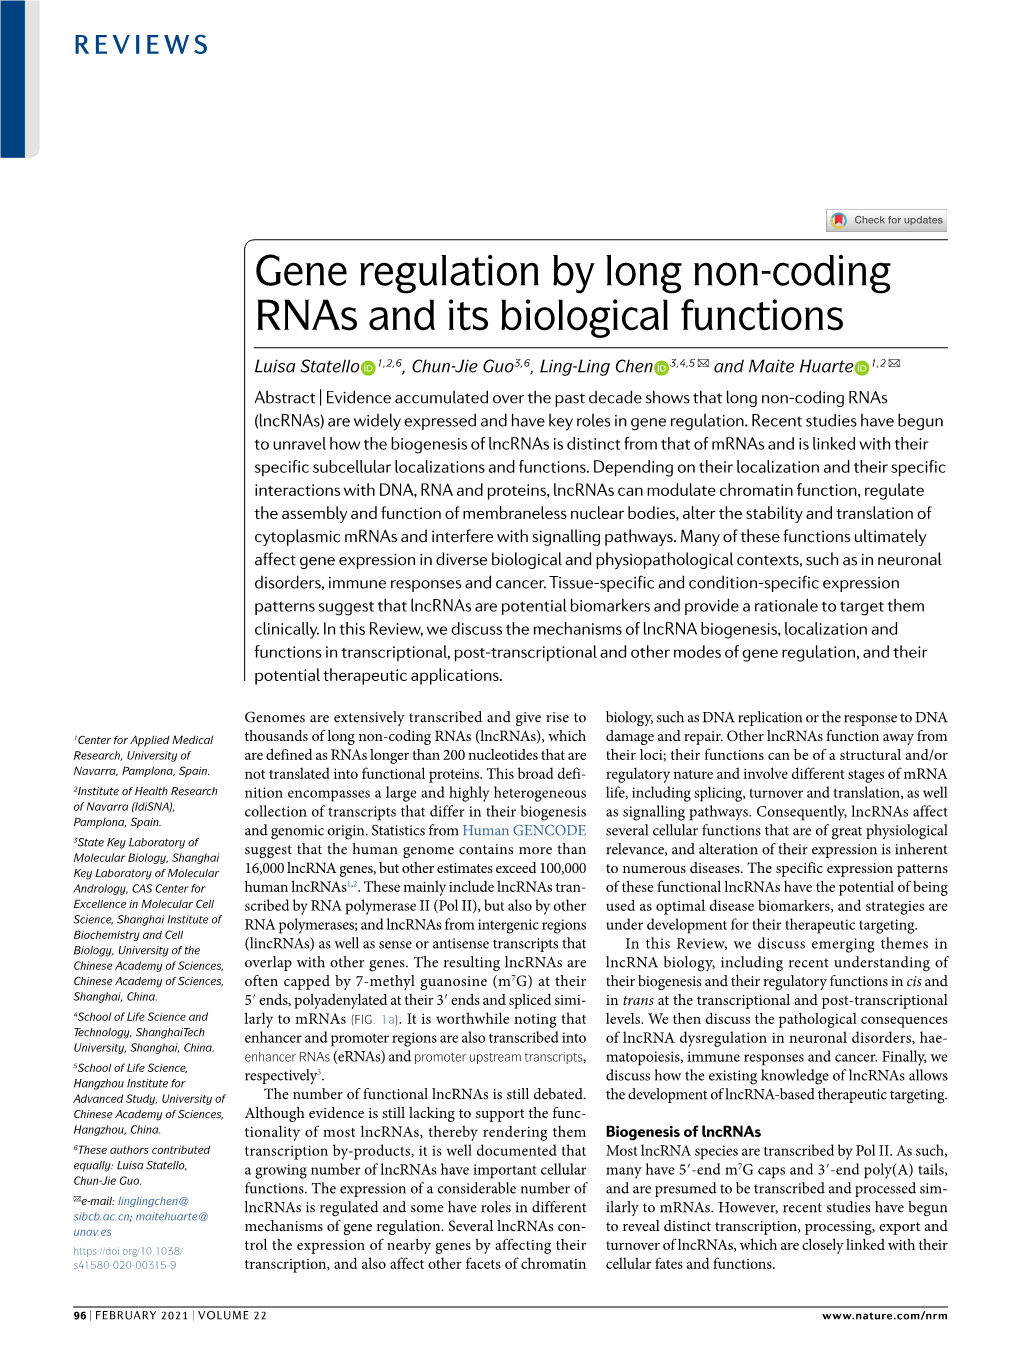 Gene Regulation by Long Non-Coding Rnas and Its Biological Functions